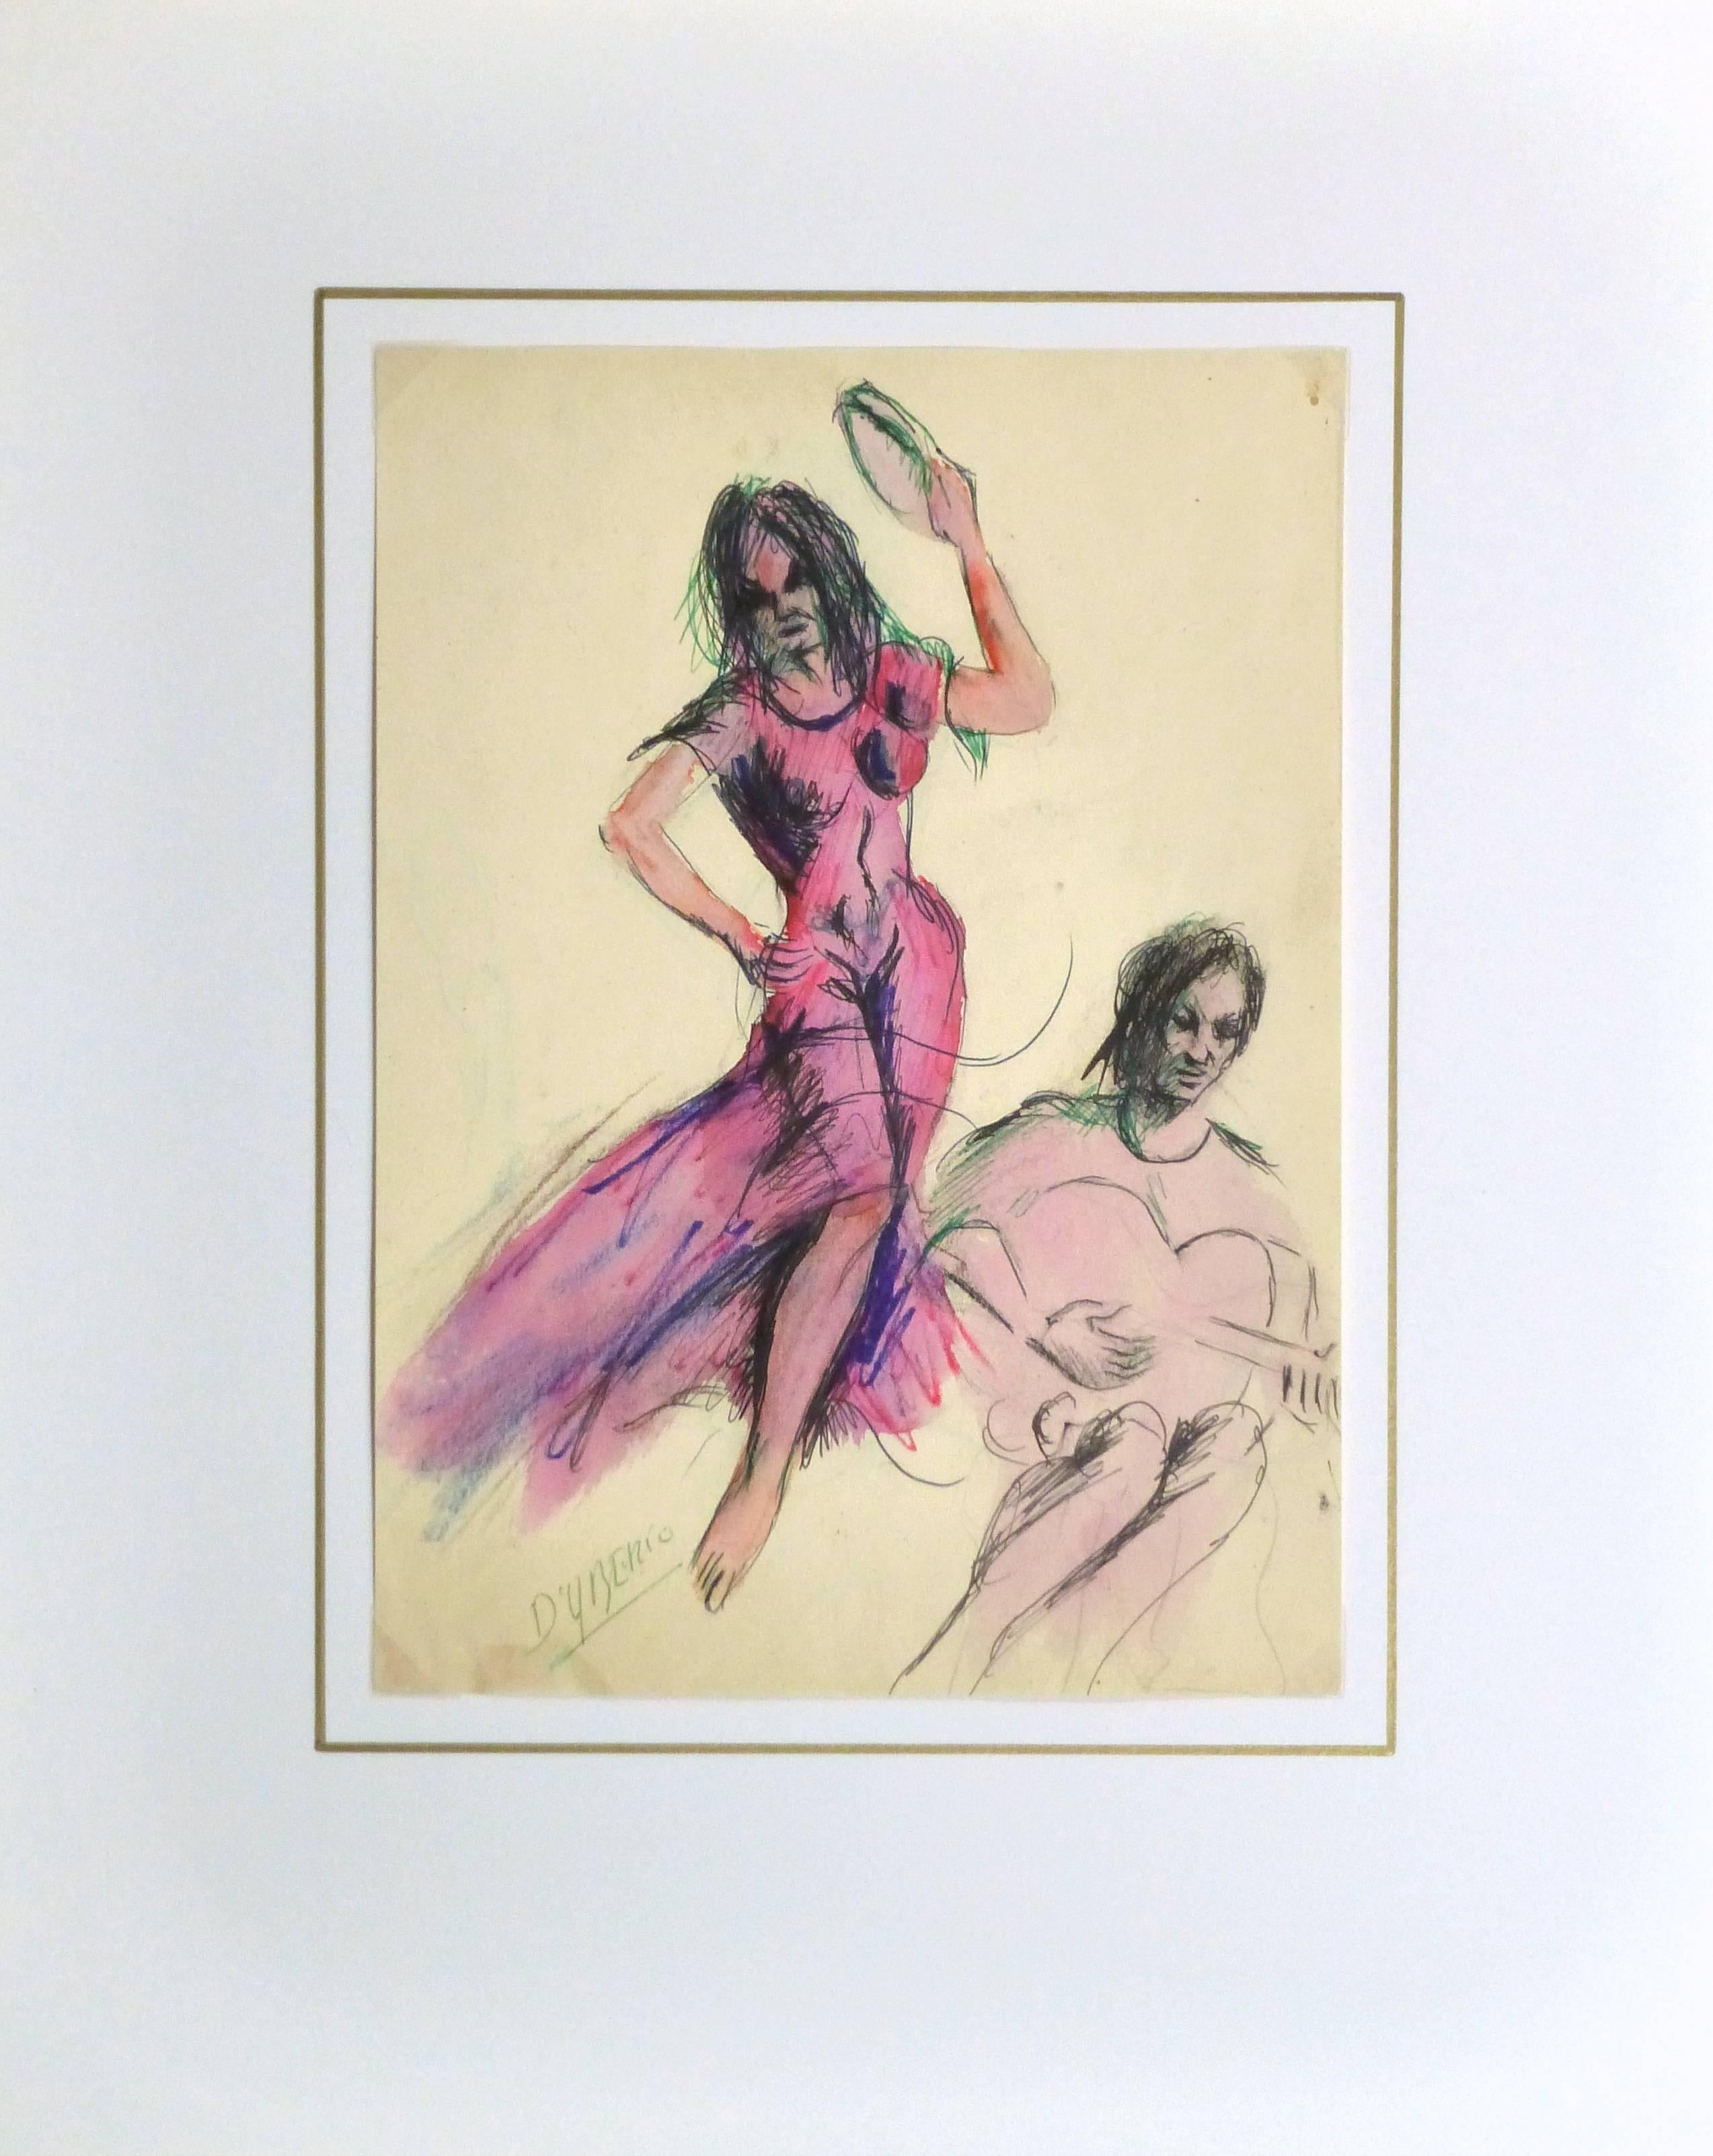 Lively watercolor and ink painting of a dancing female clad in a form fitting pink dress alongside a male guitar player by Spanish artist D'Yberio, circa 1960. Signed lower left.

Original artwork on paper displayed on a white mat with a gold